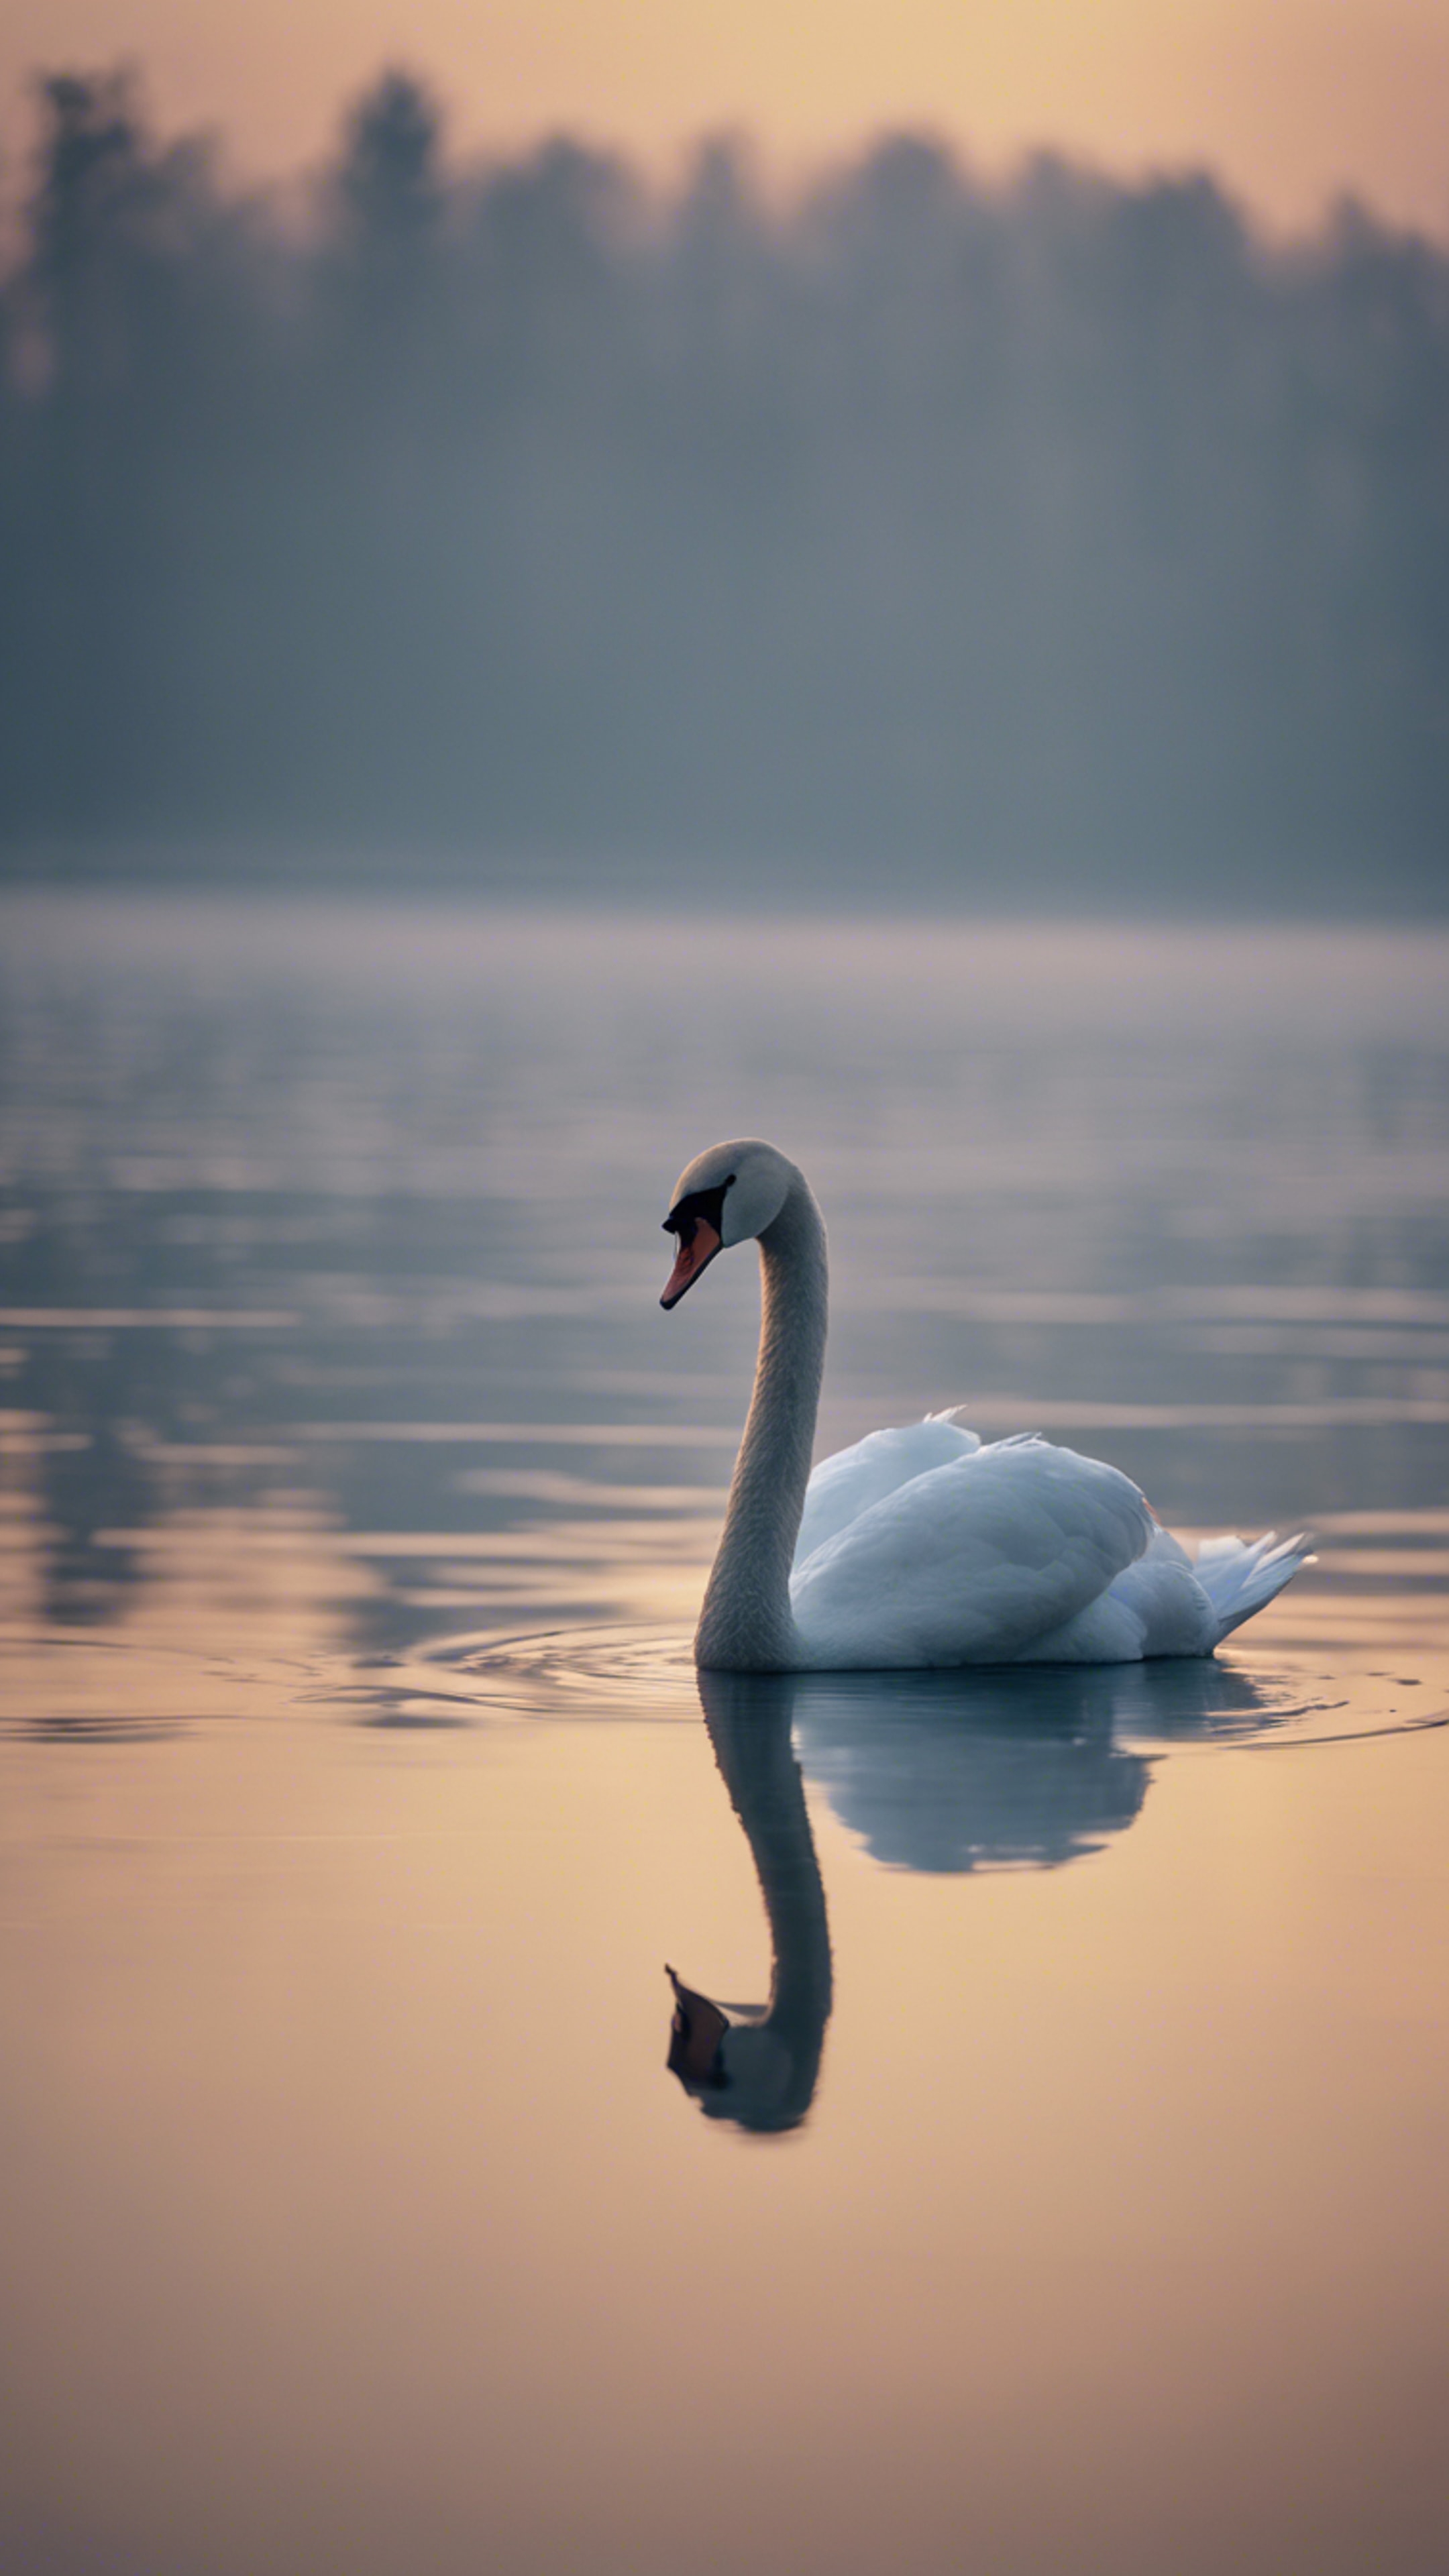 A single love-struck swan swimming alone in a desolate lake under the pallid glow of a gloomy moon. Hintergrund[674930fc7c9f467a8426]